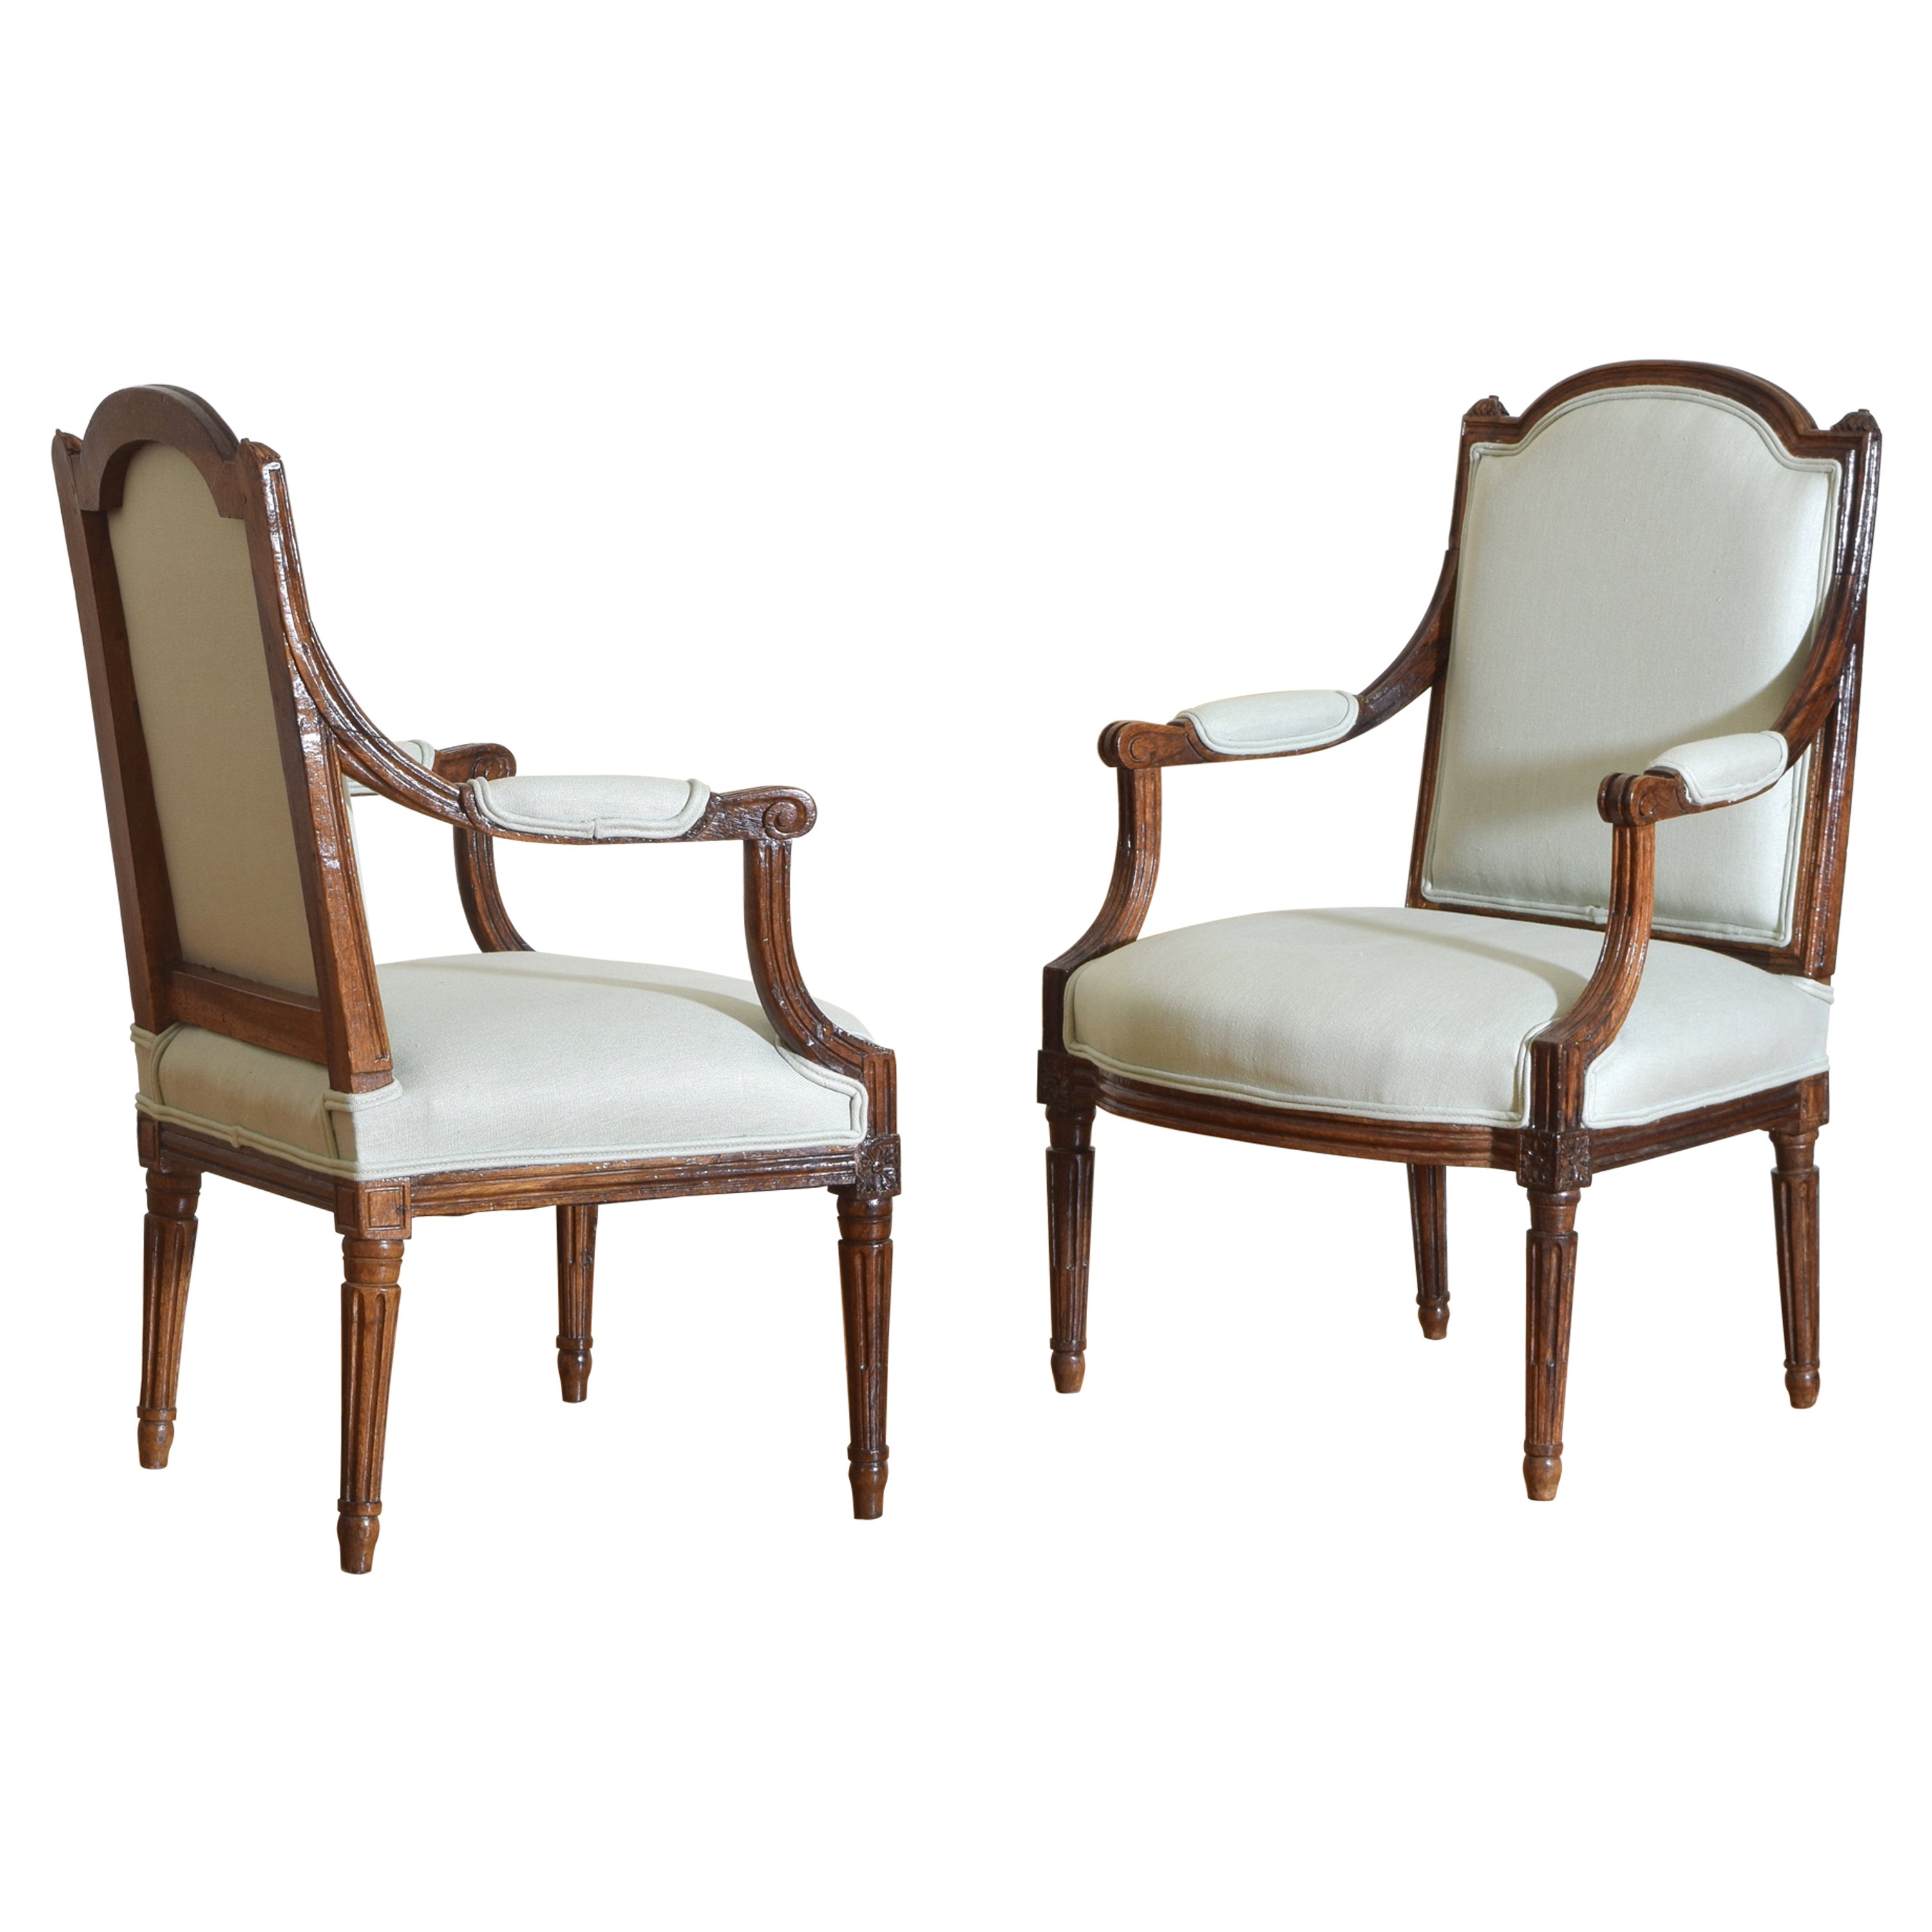 Pair French Louis XVI Period Walnut and Upholstered Fauteuils, Late 18th  Century at 1stDibs